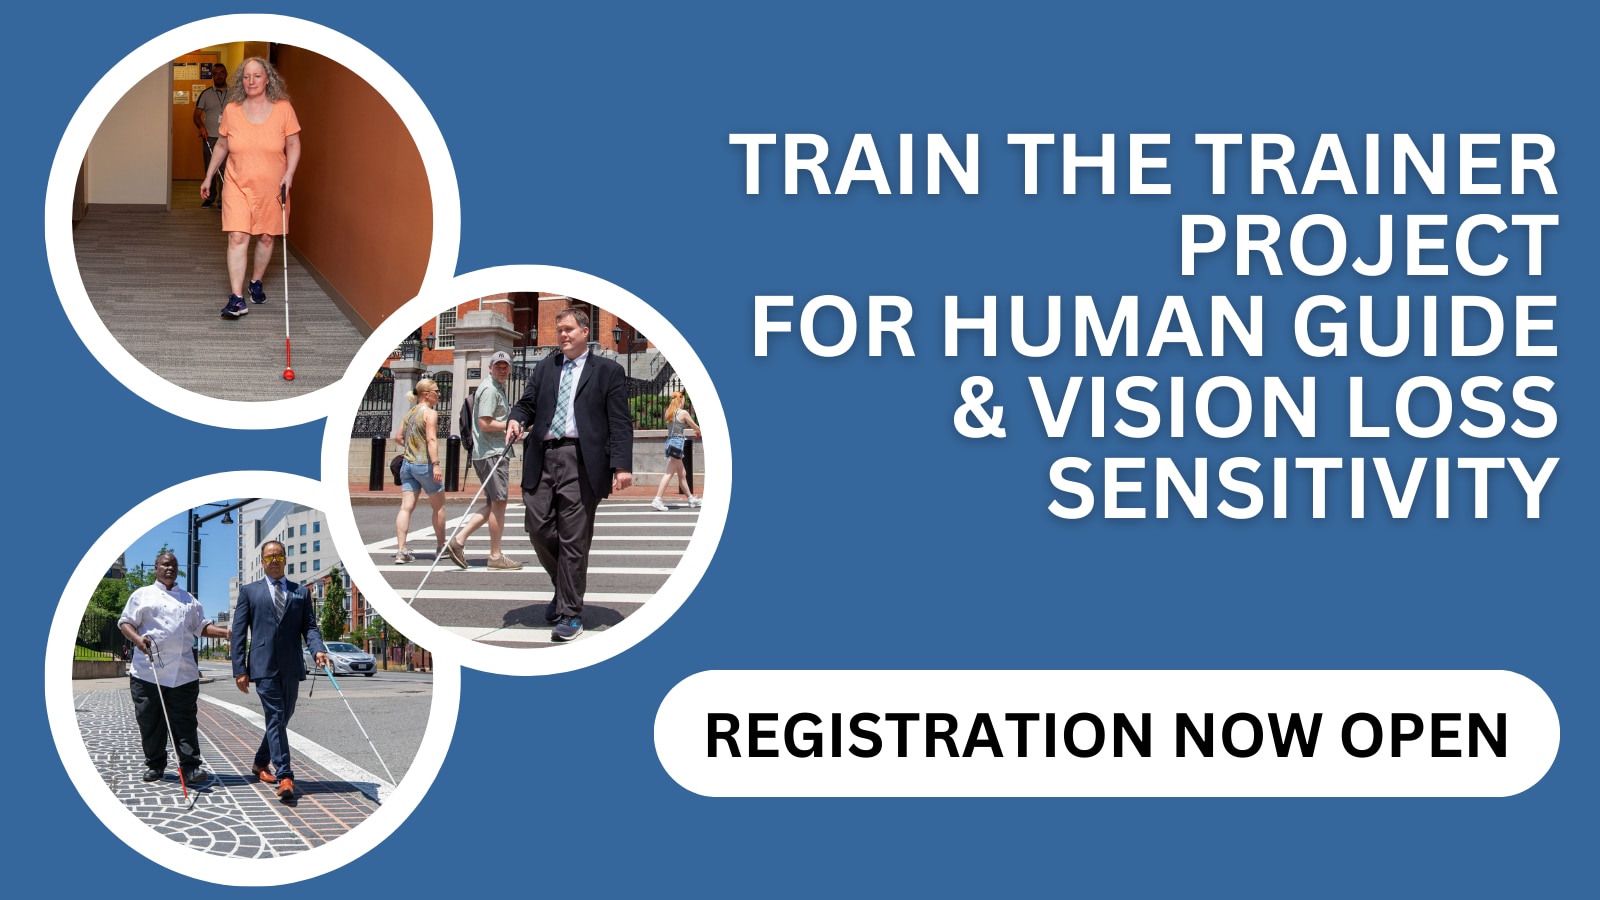 Three photos of people walking with their white canes and the text: Train the Trainer for Human Guide & Vision Loss Sensitivity, Registration now open